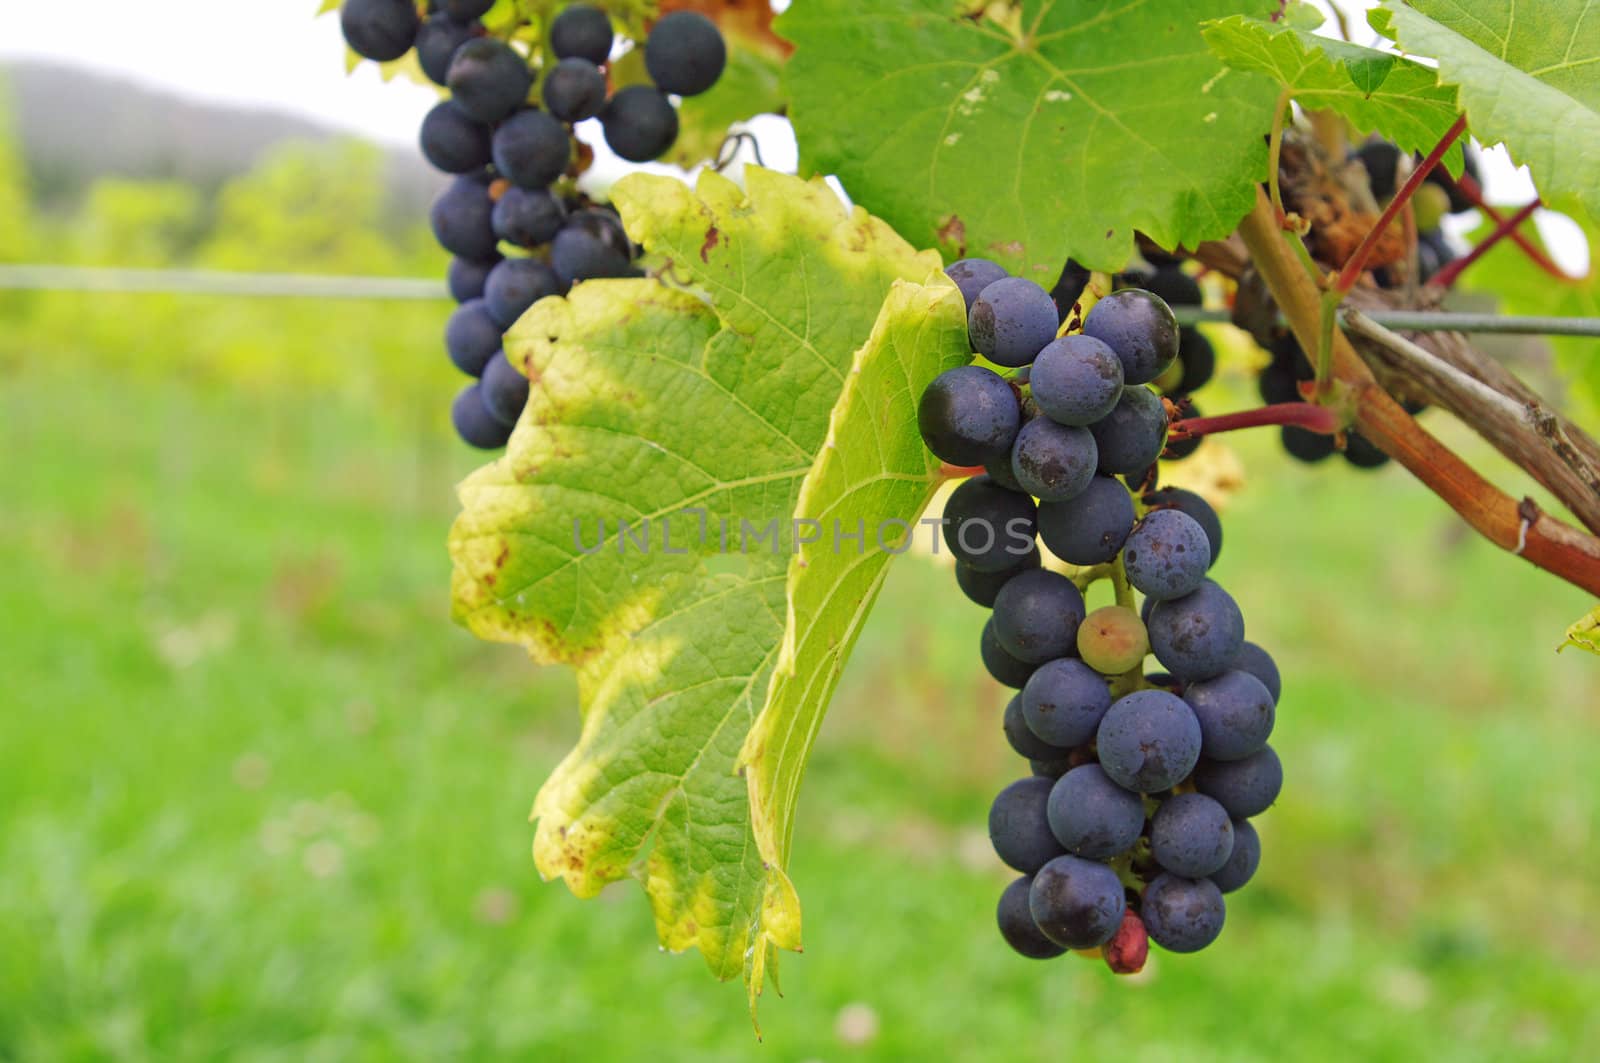 Blue grapes ripening on the Vine